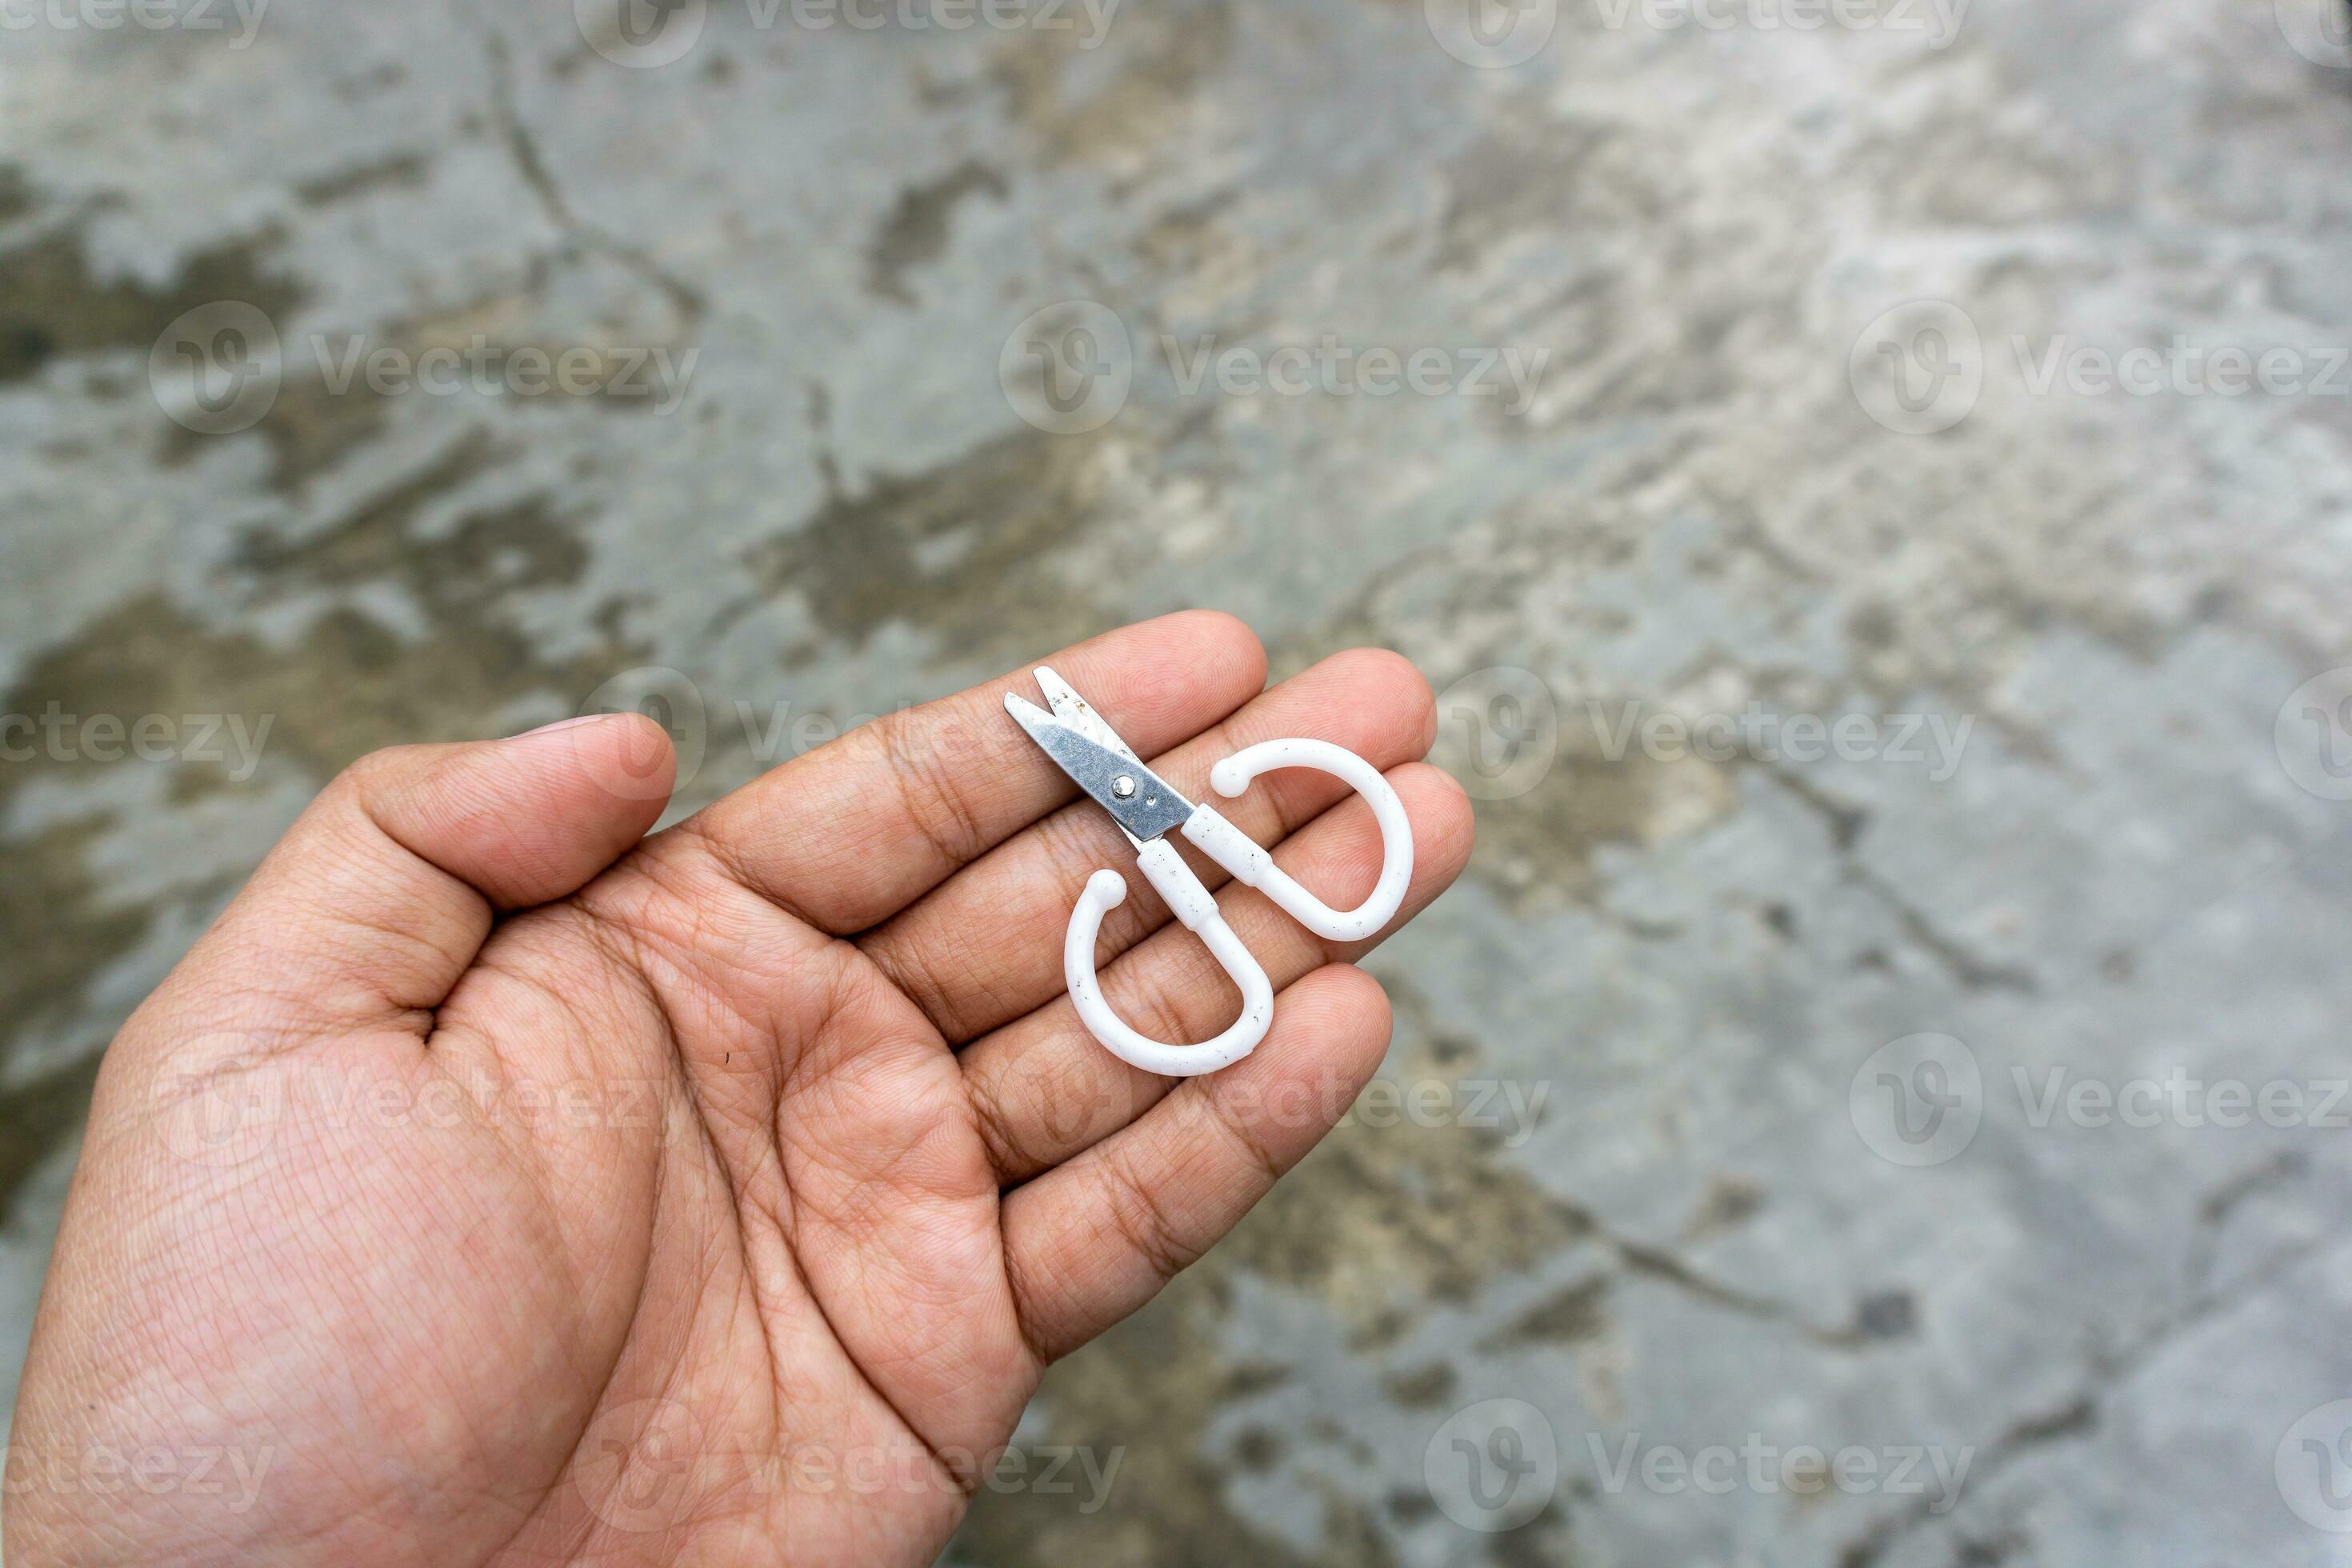 cute little scissors for kids playing. Small scissors on adult hand.  25739950 Stock Photo at Vecteezy